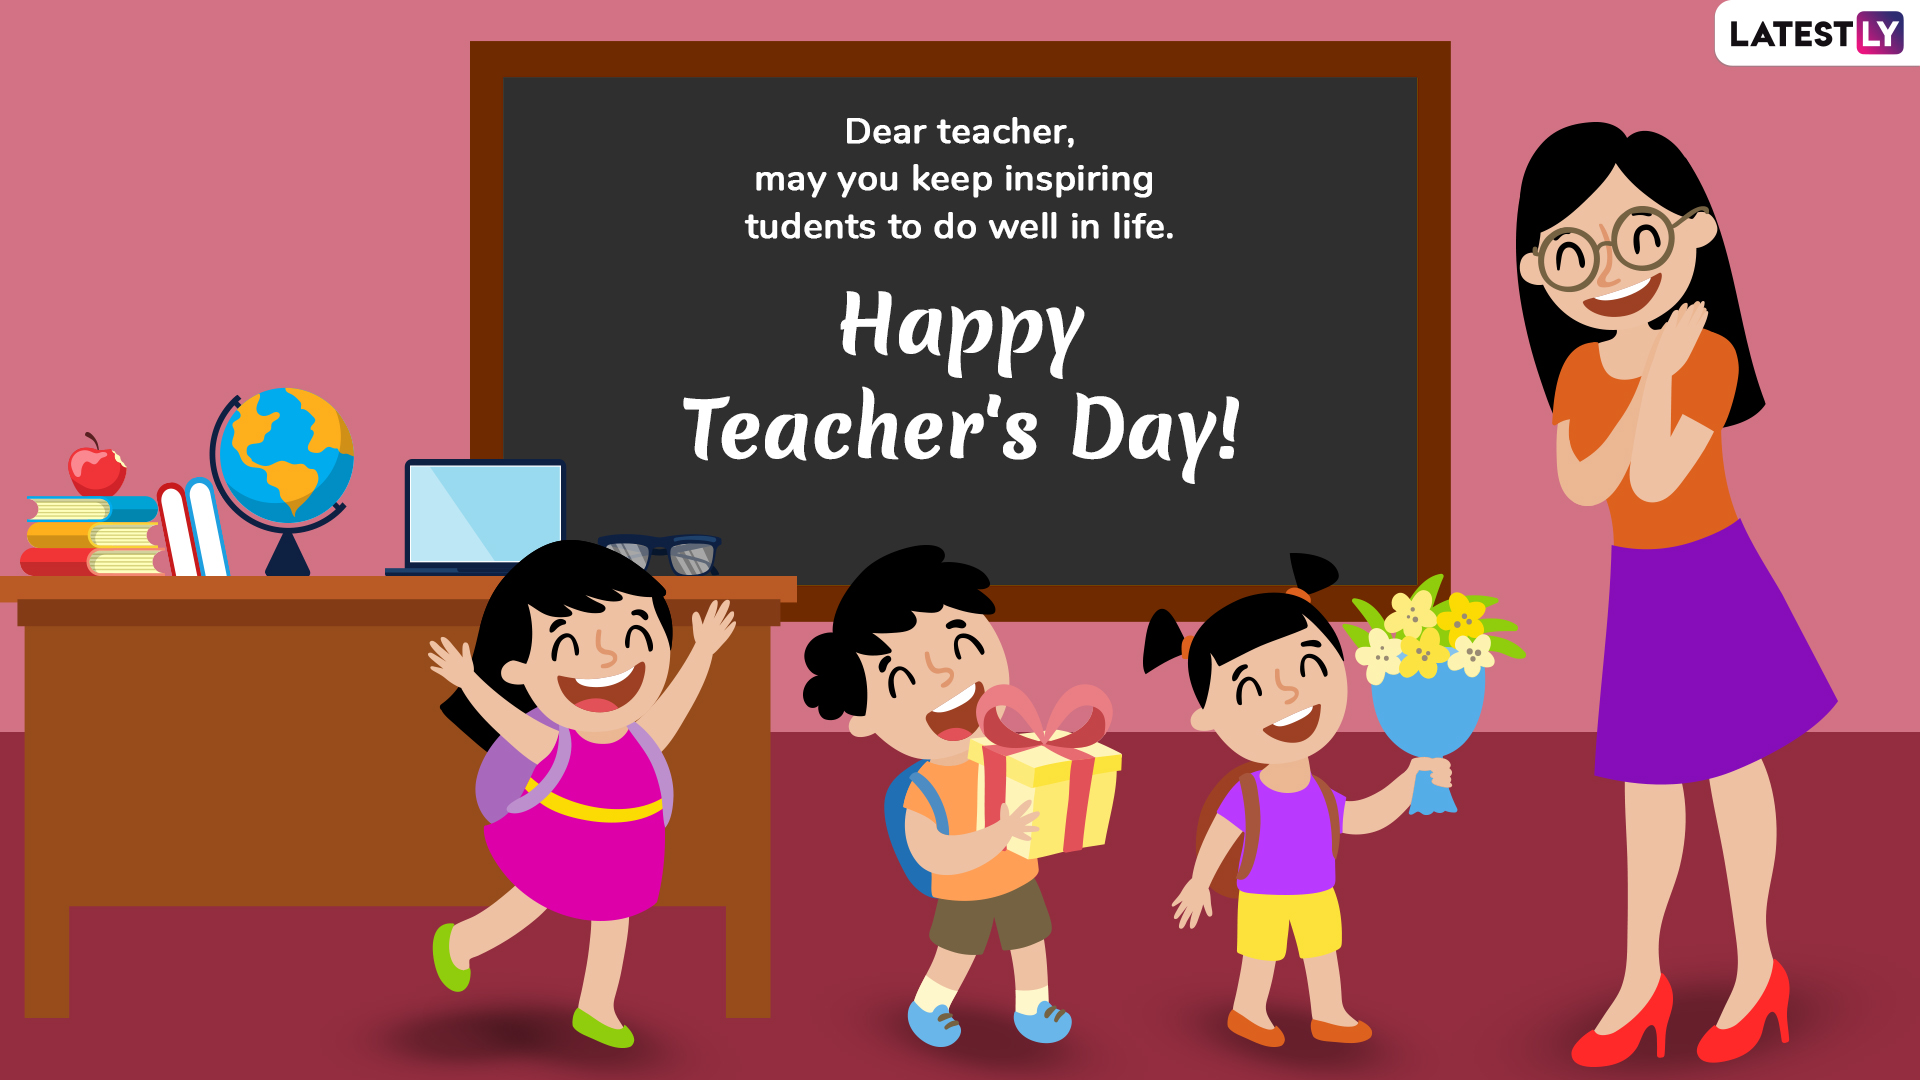 Teachers' Day 2021 Quotes & HD Image: WhatsApp Messages, GIFs, Facebook Greetings, Wallpaper and SMS To Celebrate Your Teachers